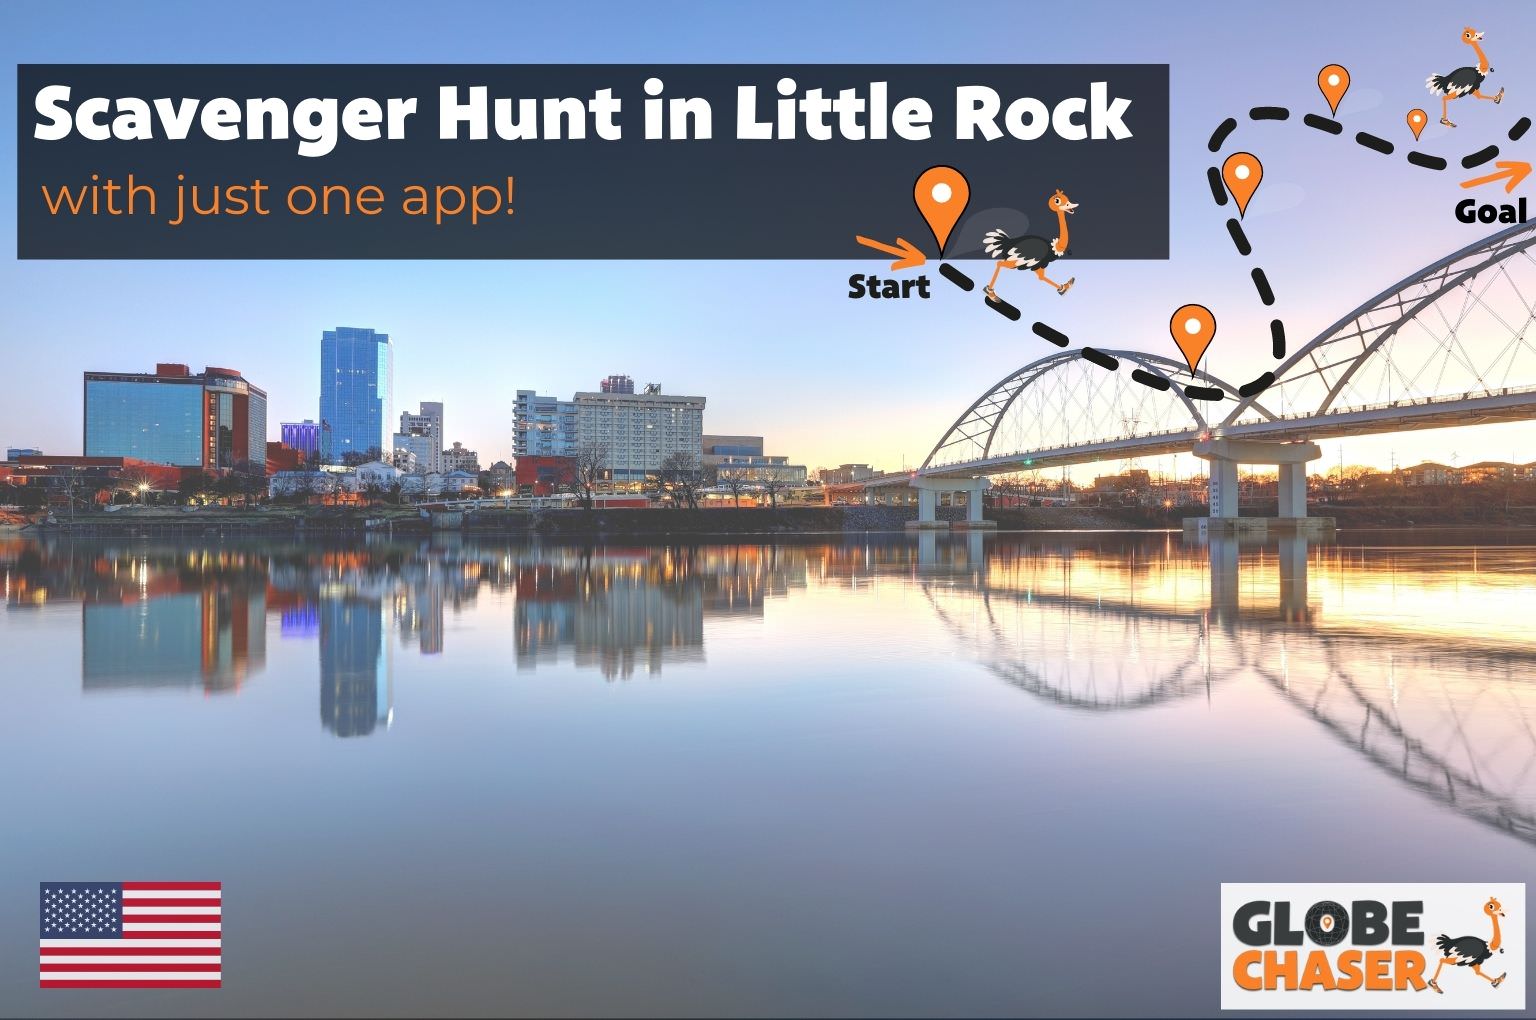 Scavenger Hunt in Little Rock, USA - Family Activities with the Globe Chaser App for Outdoor Fun